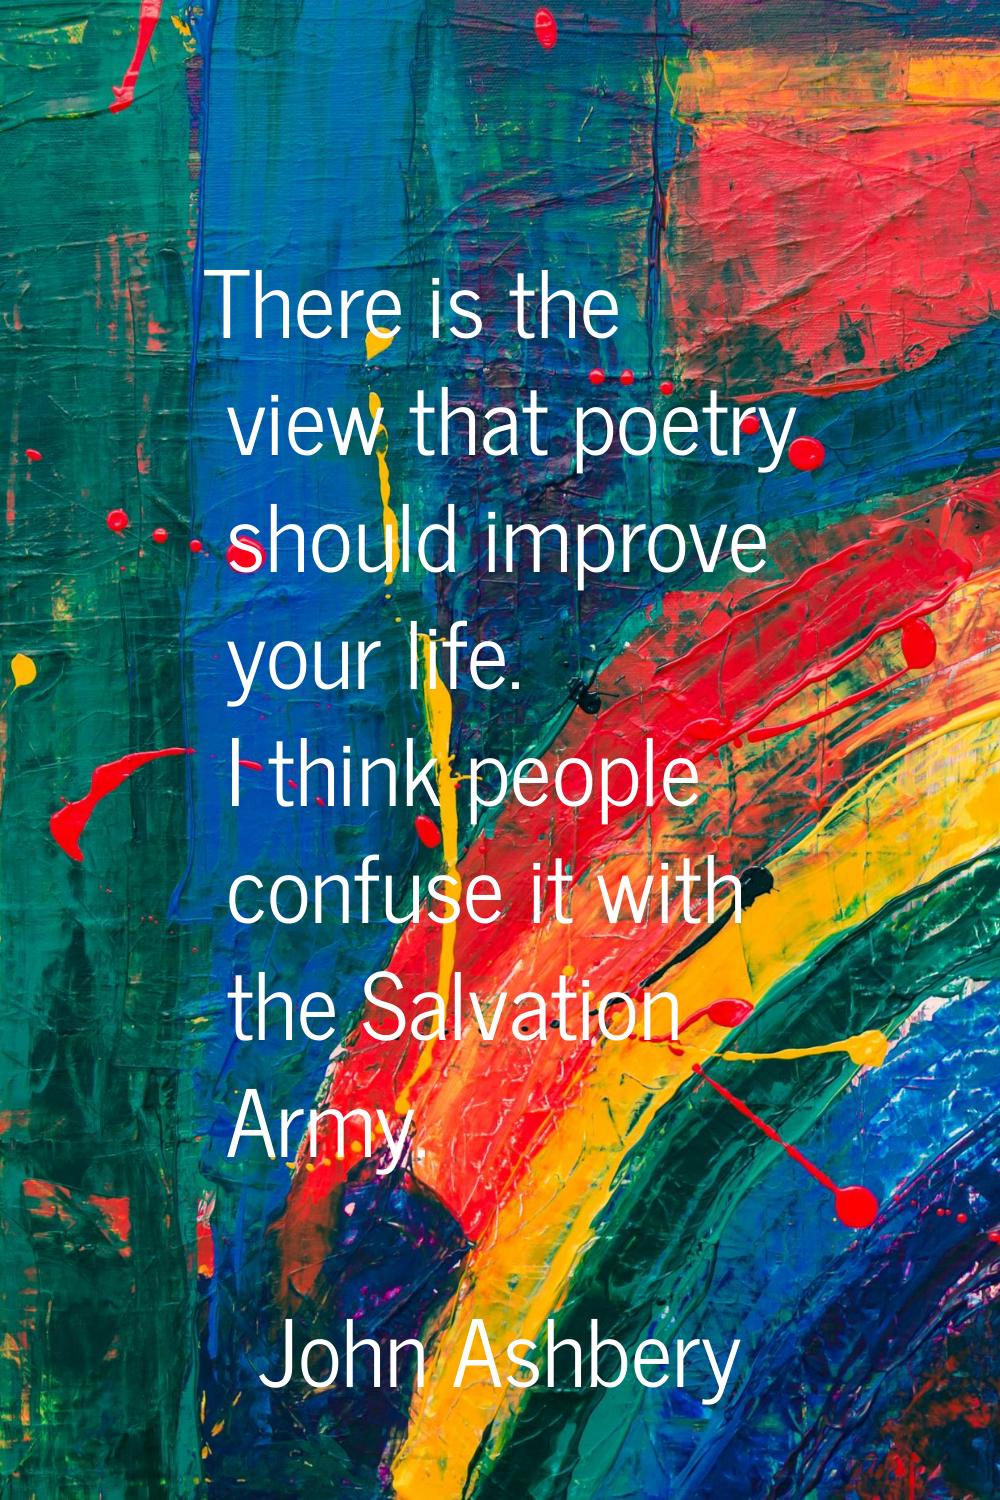 There is the view that poetry should improve your life. I think people confuse it with the Salvatio